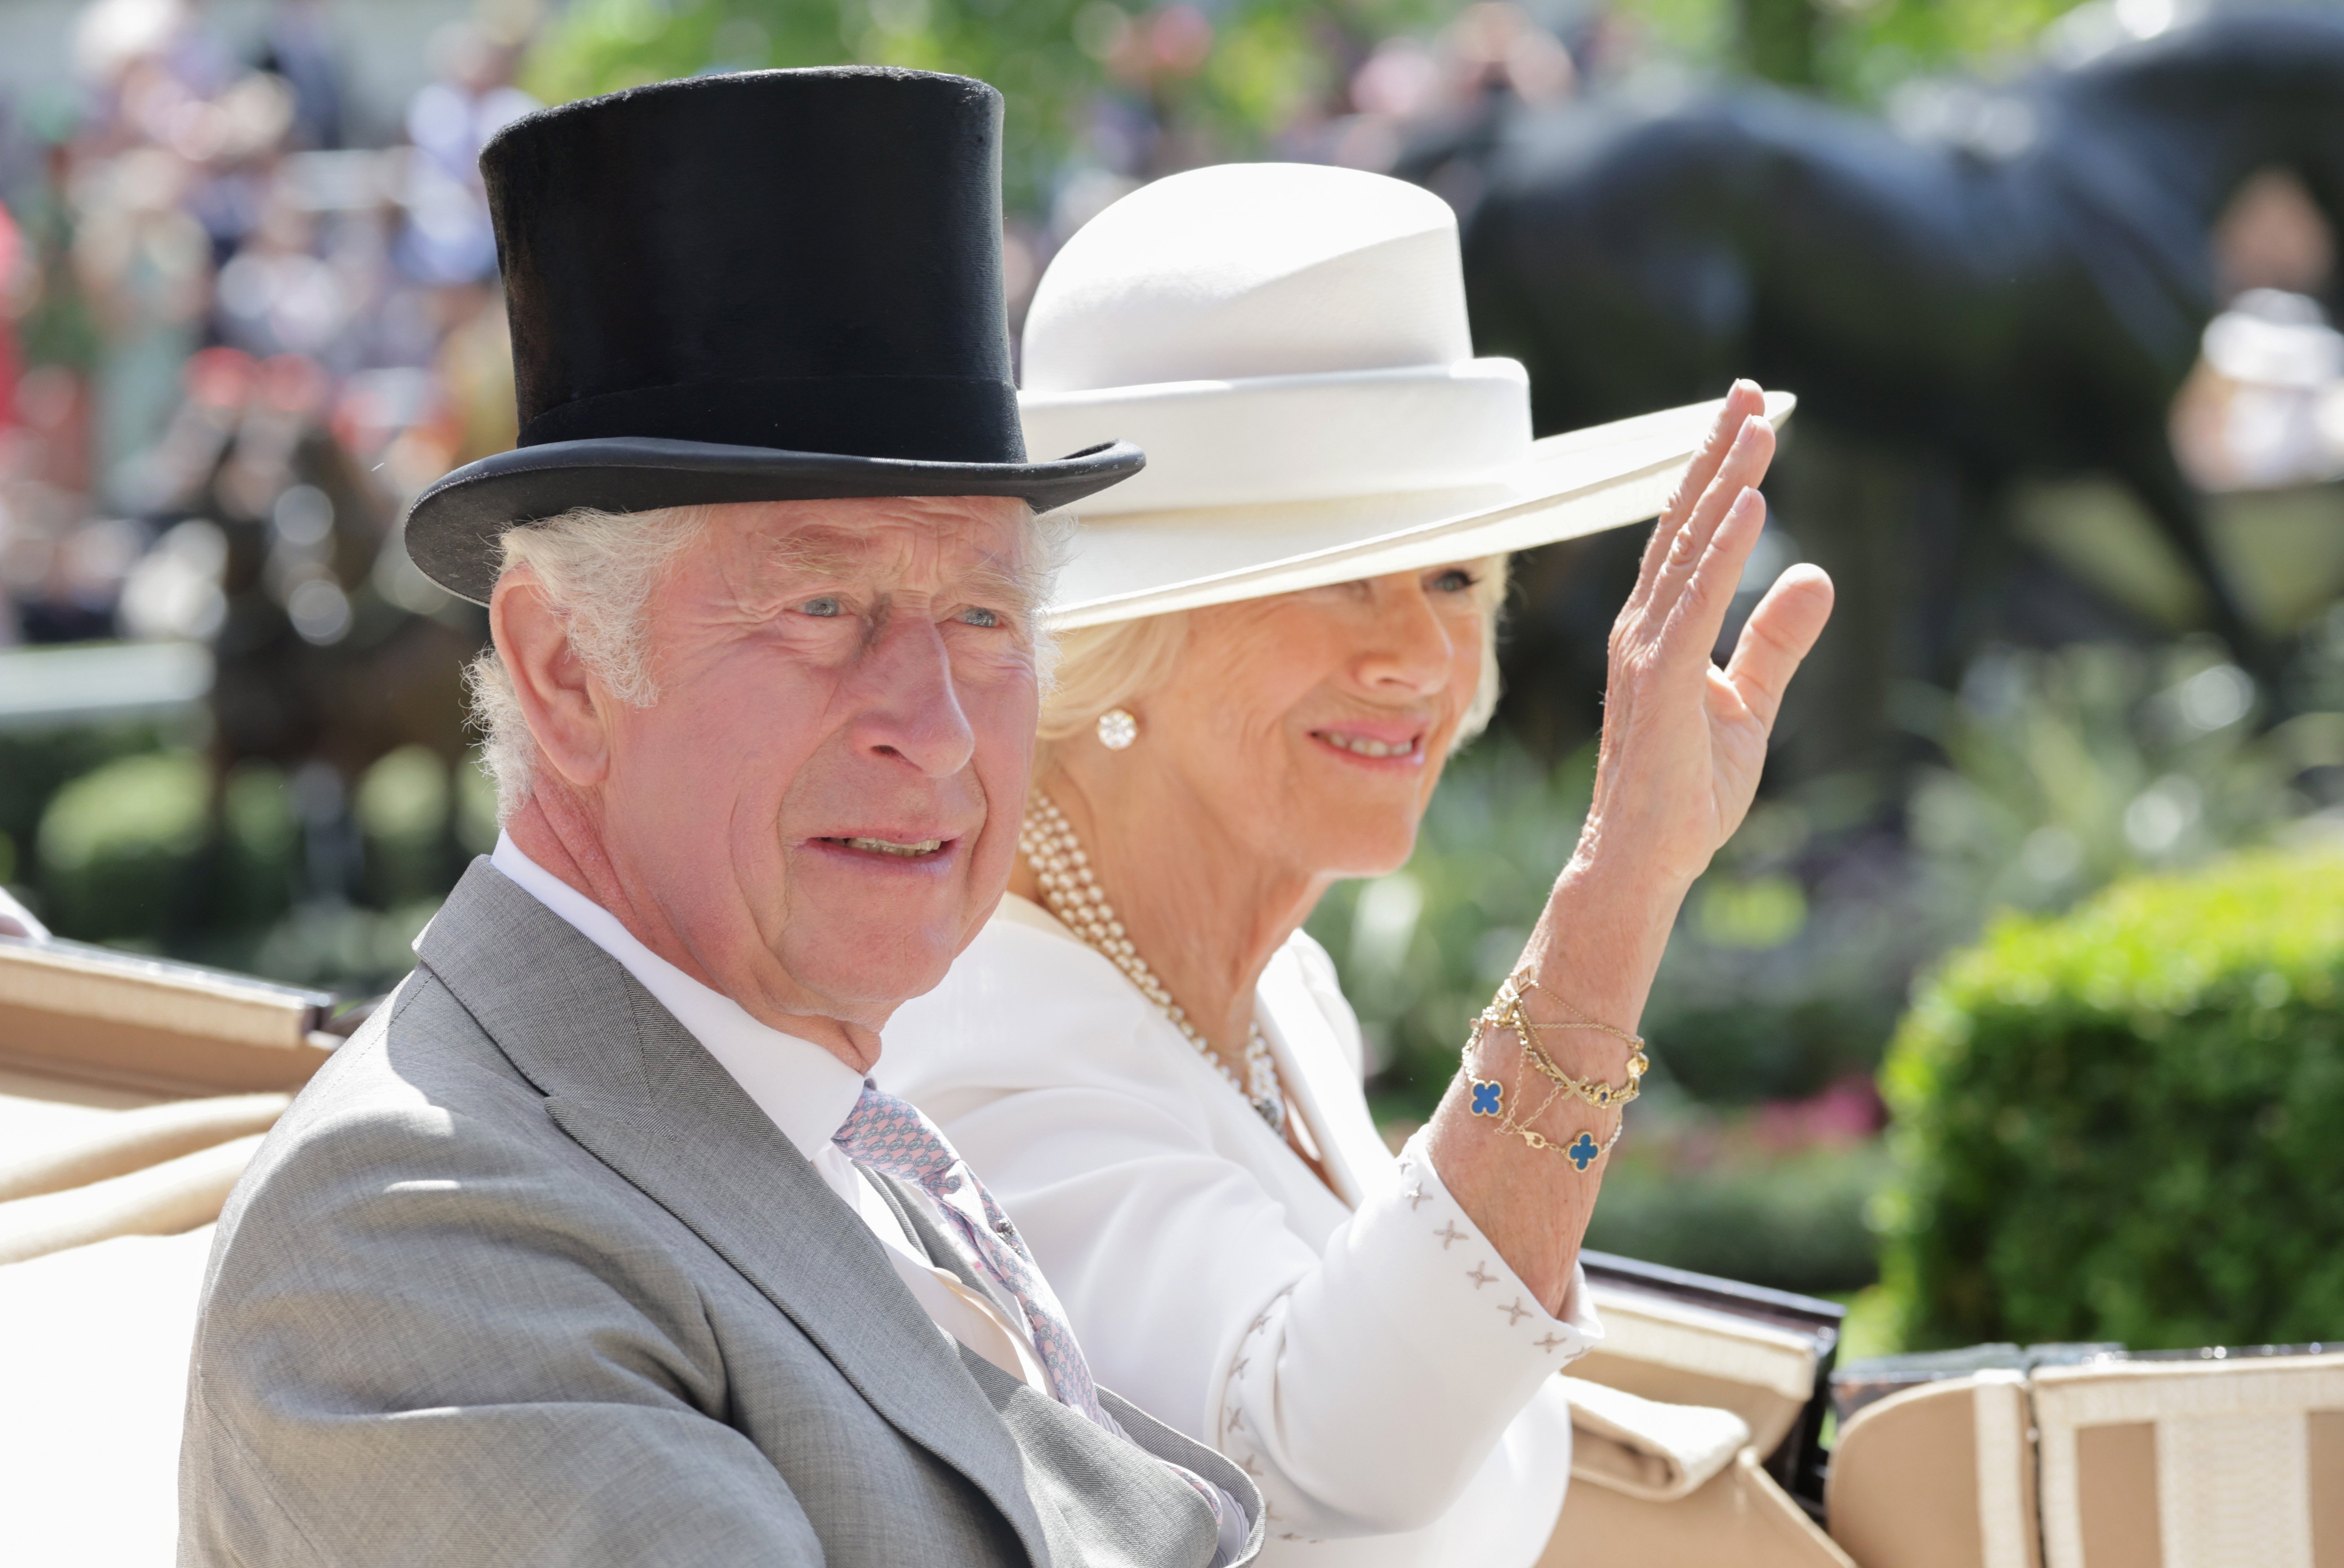 Camilla, Duchess of Cornwall pictured waving as she and Prince Charles arrive into the parade ring on the royal carriage as they attend Royal Ascot 2022 at Ascot Racecourse on June 15, 2022 in Ascot, England. | Source: Getty Images